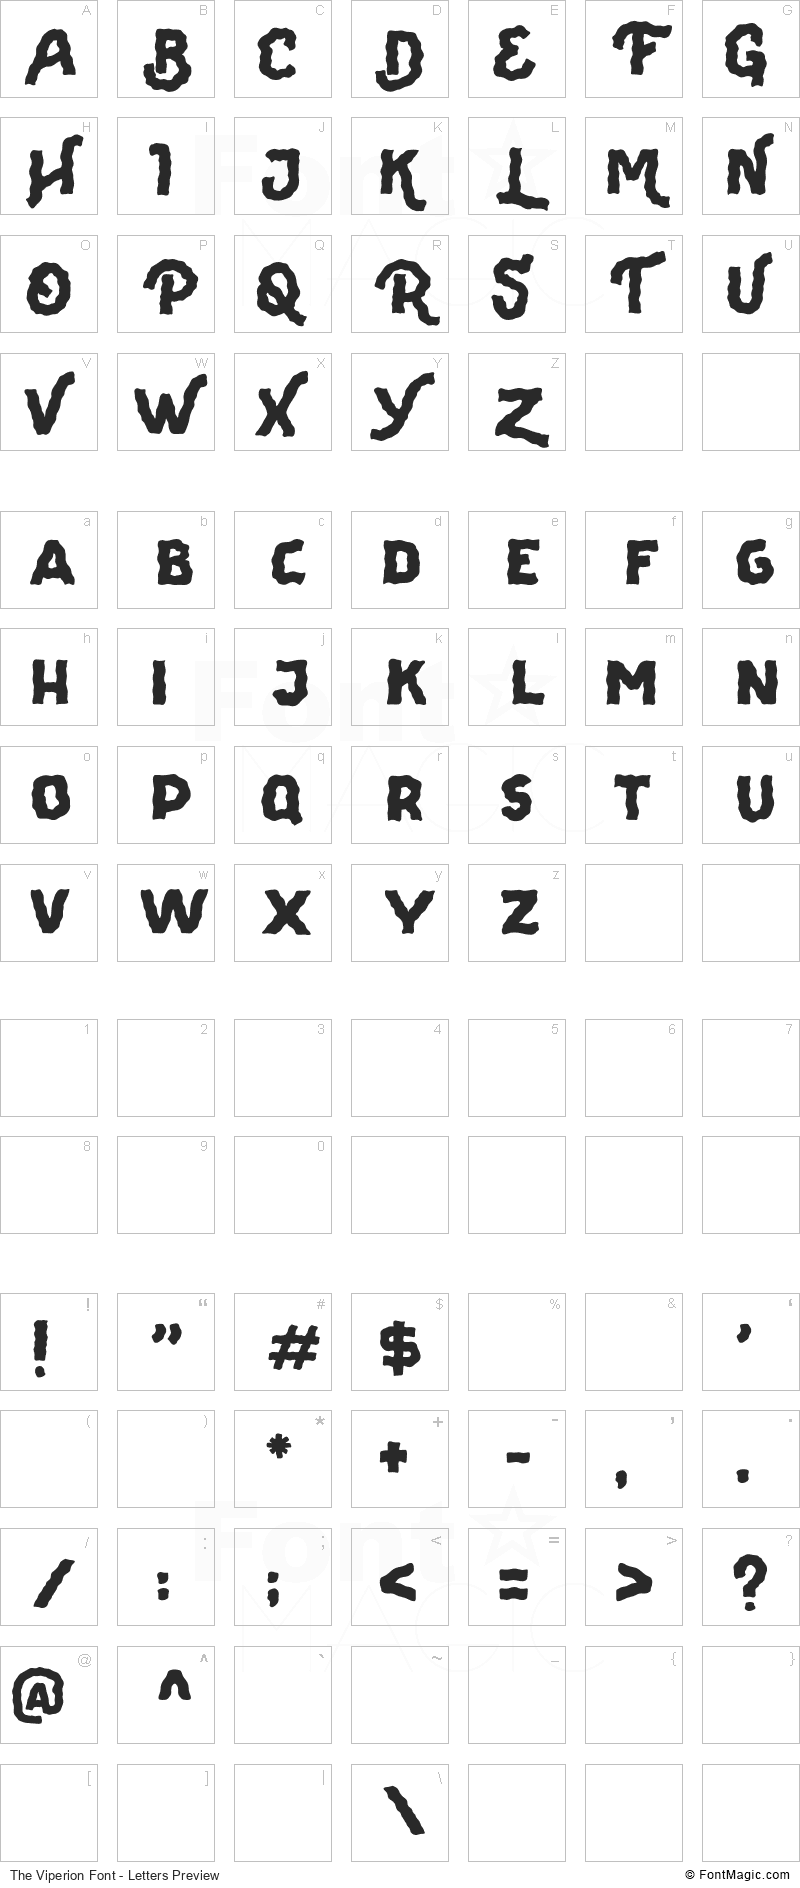 The Viperion Font - All Latters Preview Chart